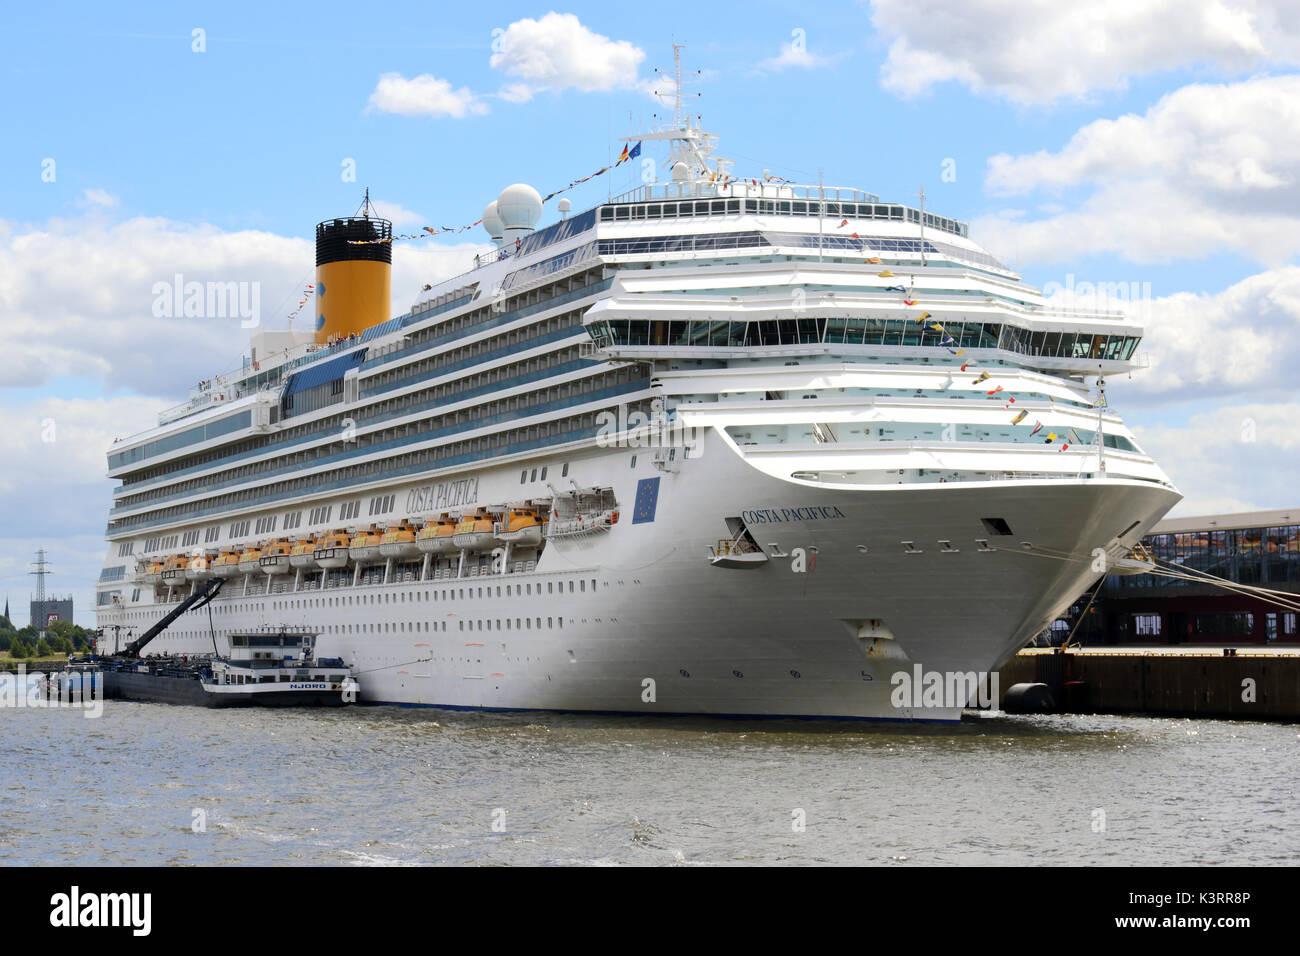 The cruise ship Costa Pacifica is located in the port of Hamburg. Stock Photo